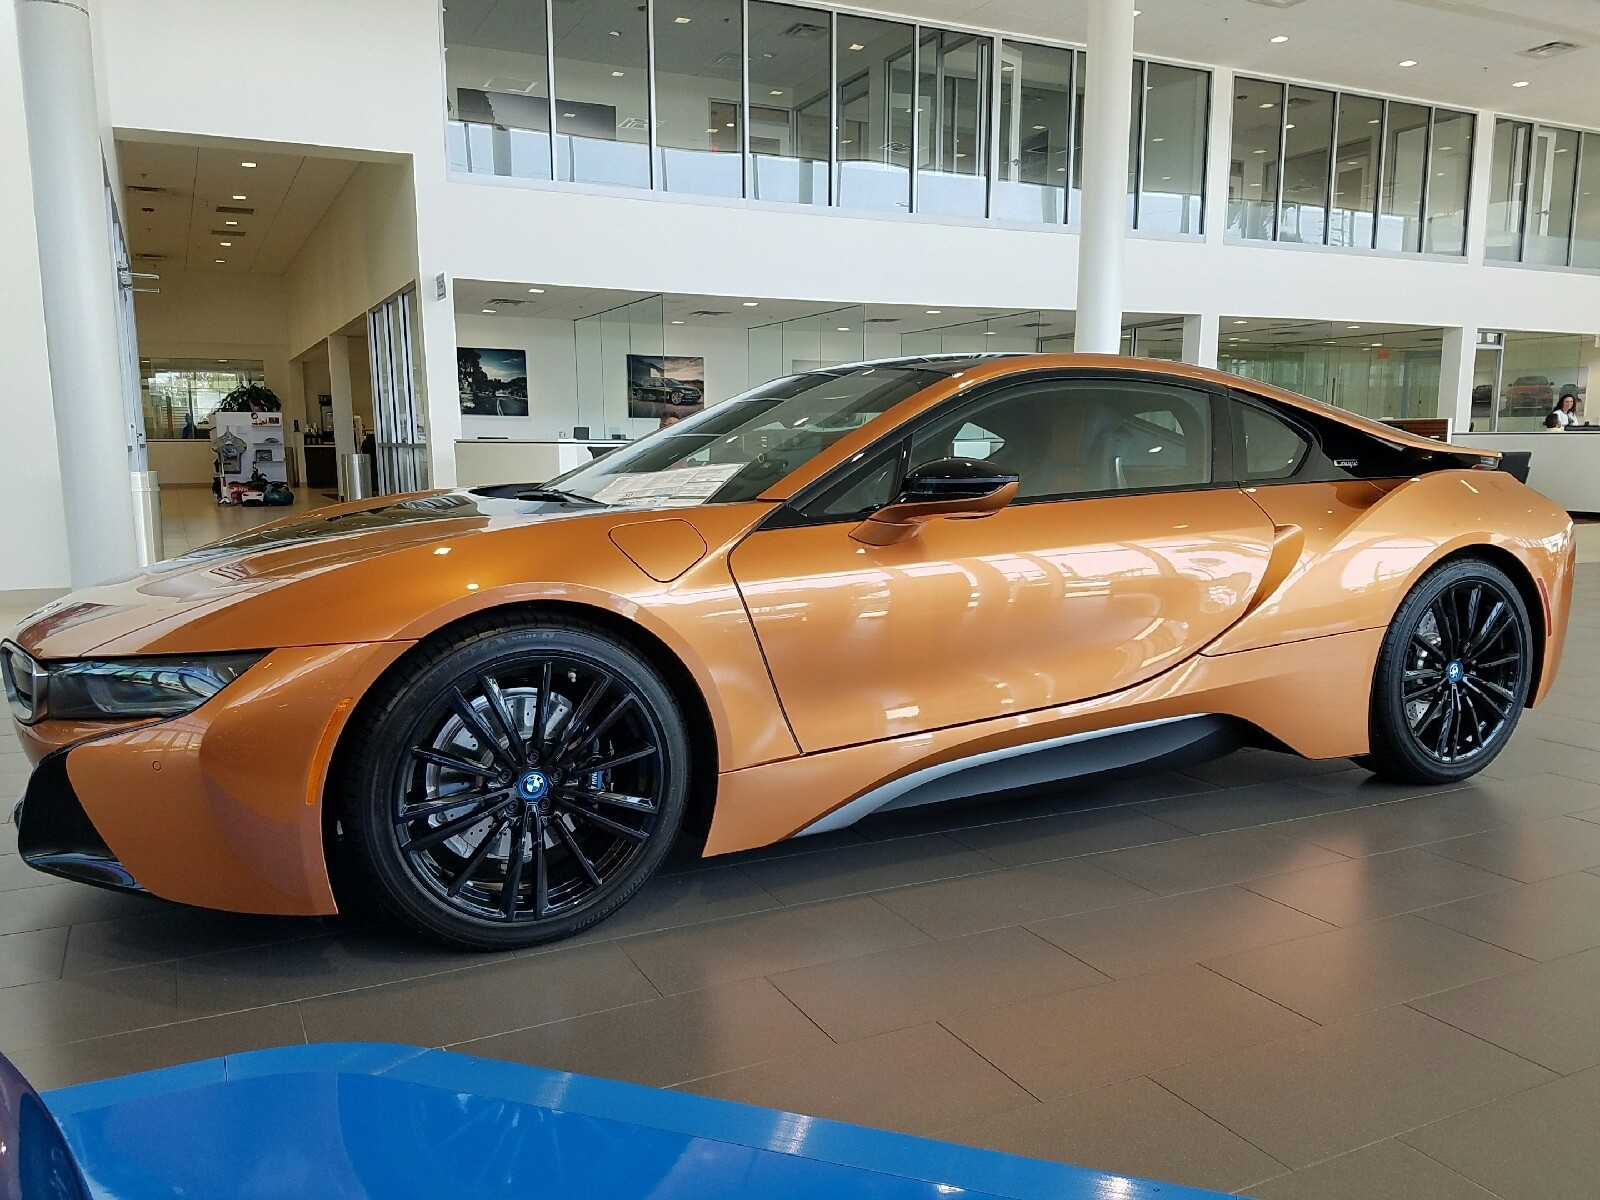 New 2019 Bmw I8 Coupe Top Hd Wallpapers - Supercar - HD Wallpaper 